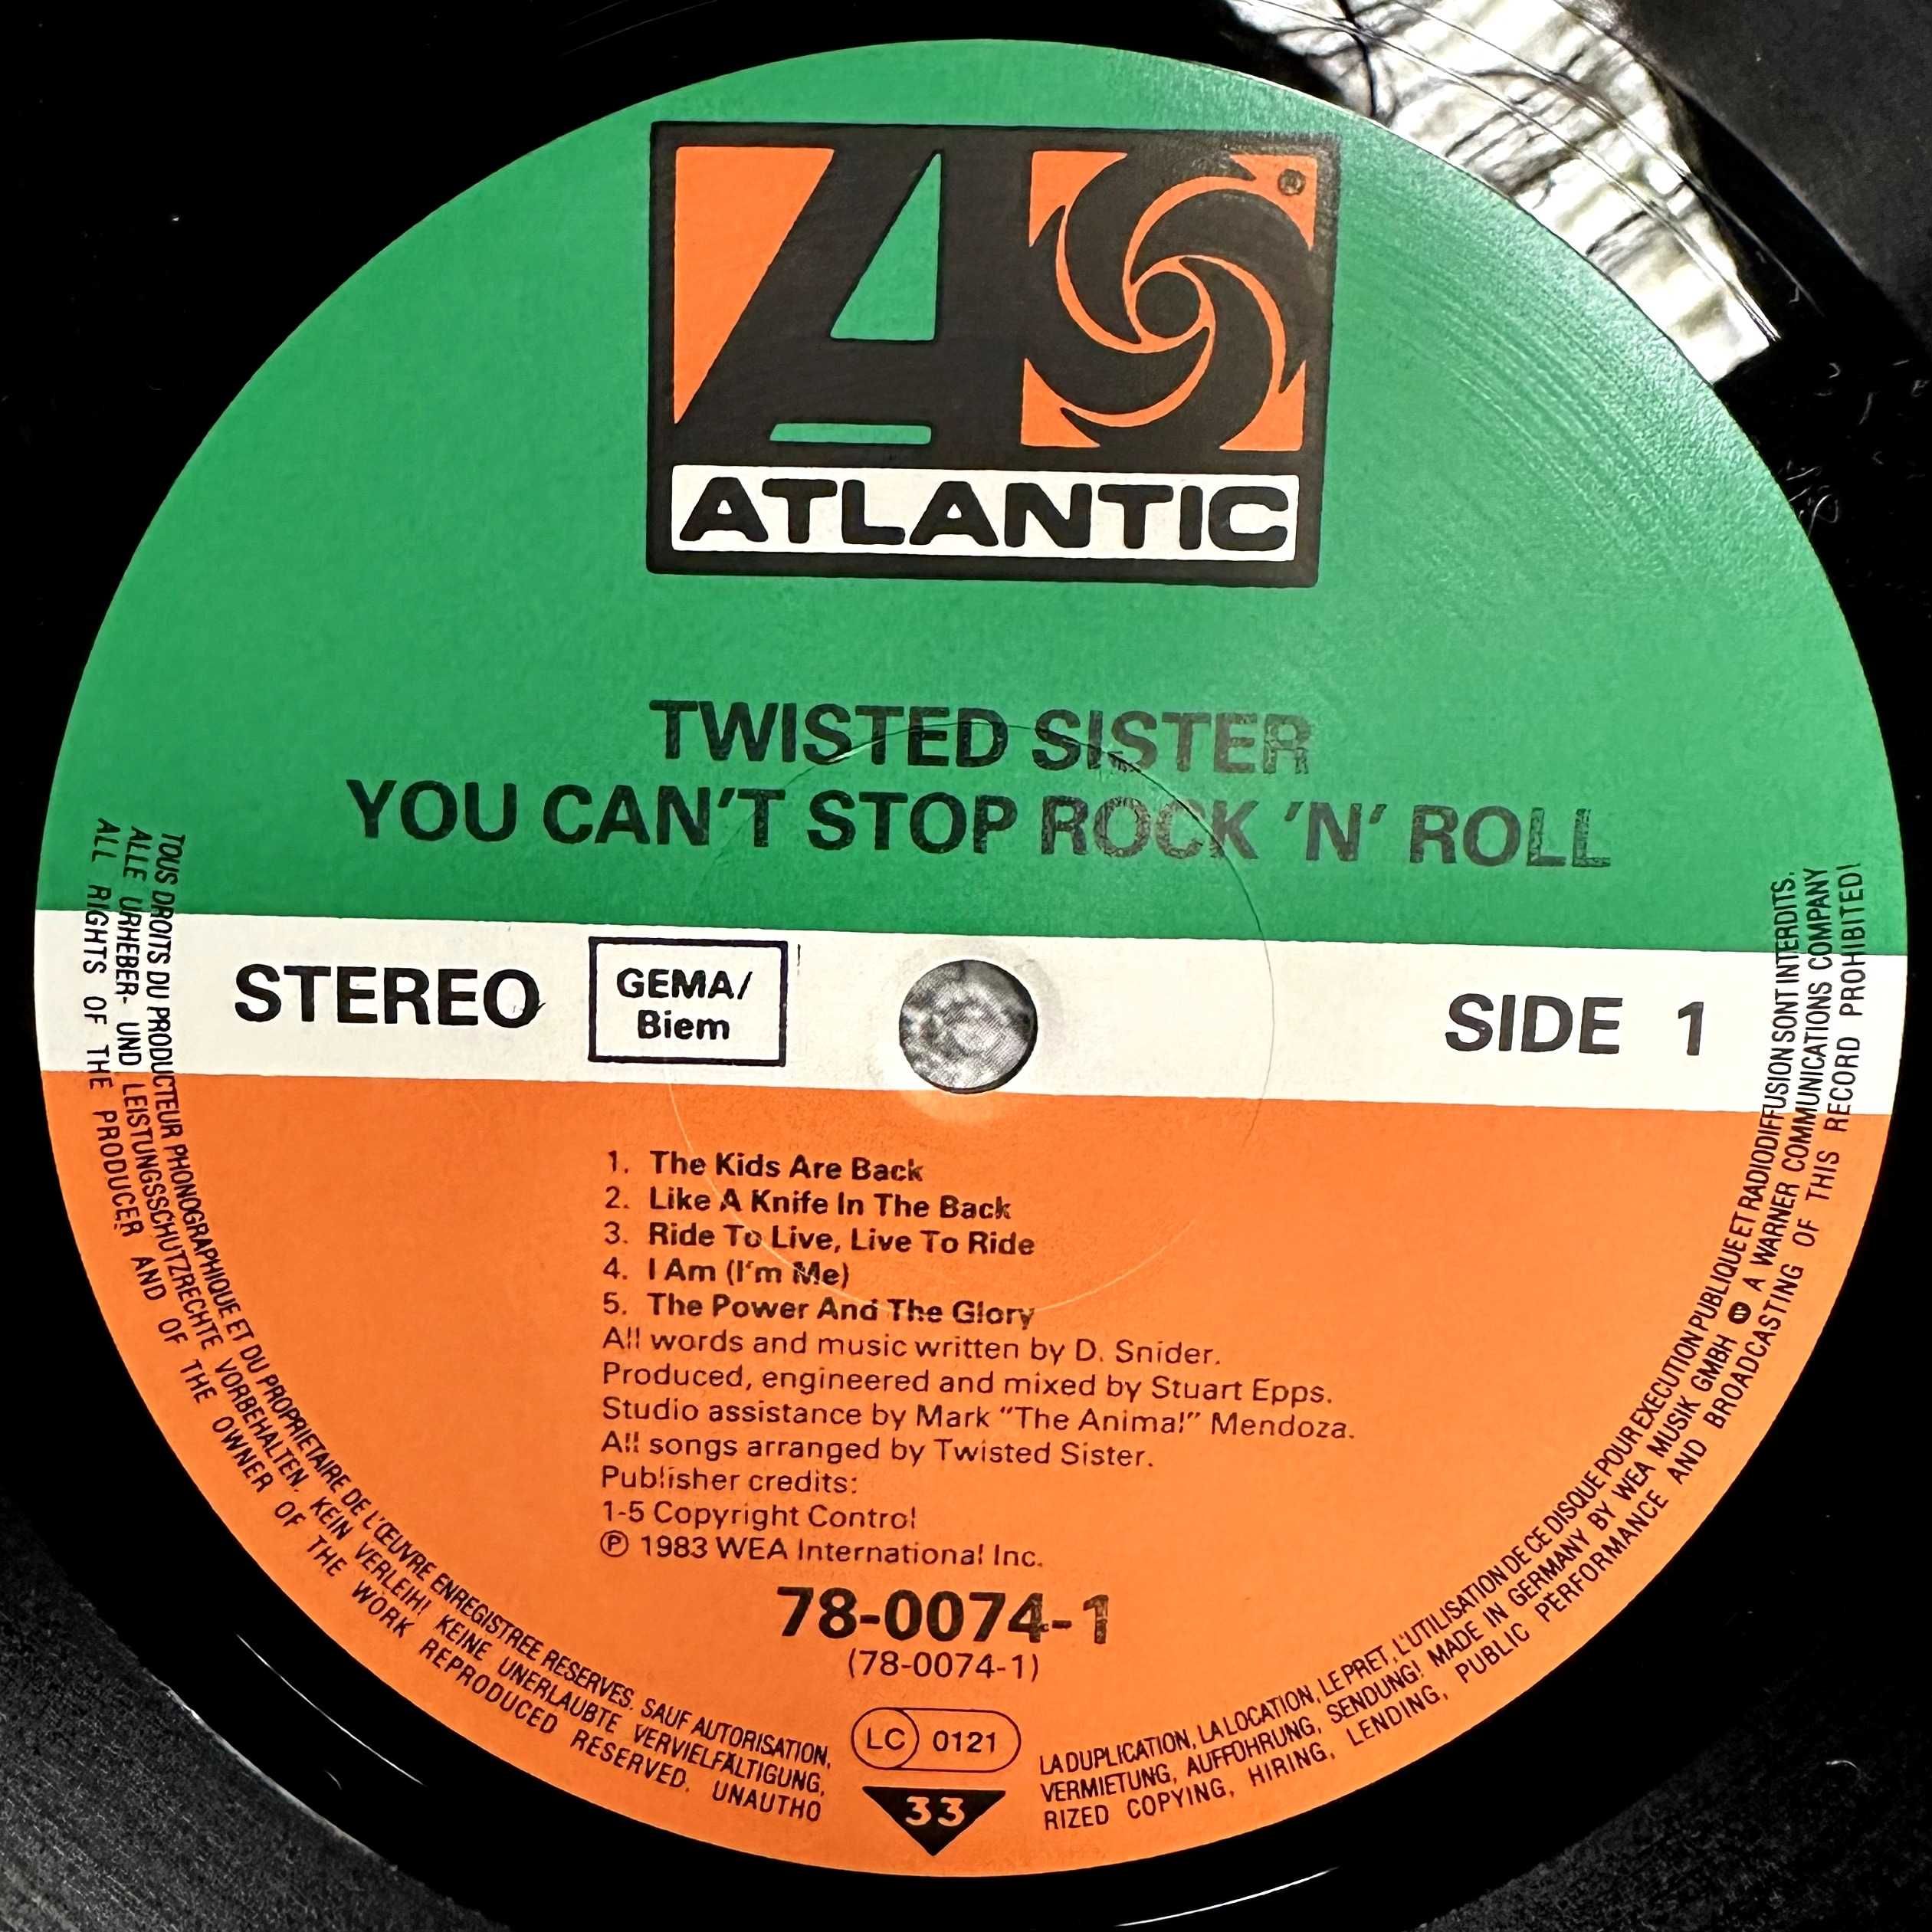 Twisted Sister - You Can't Stop Rock'n'Roll (Vinyl, 1983, Germany)